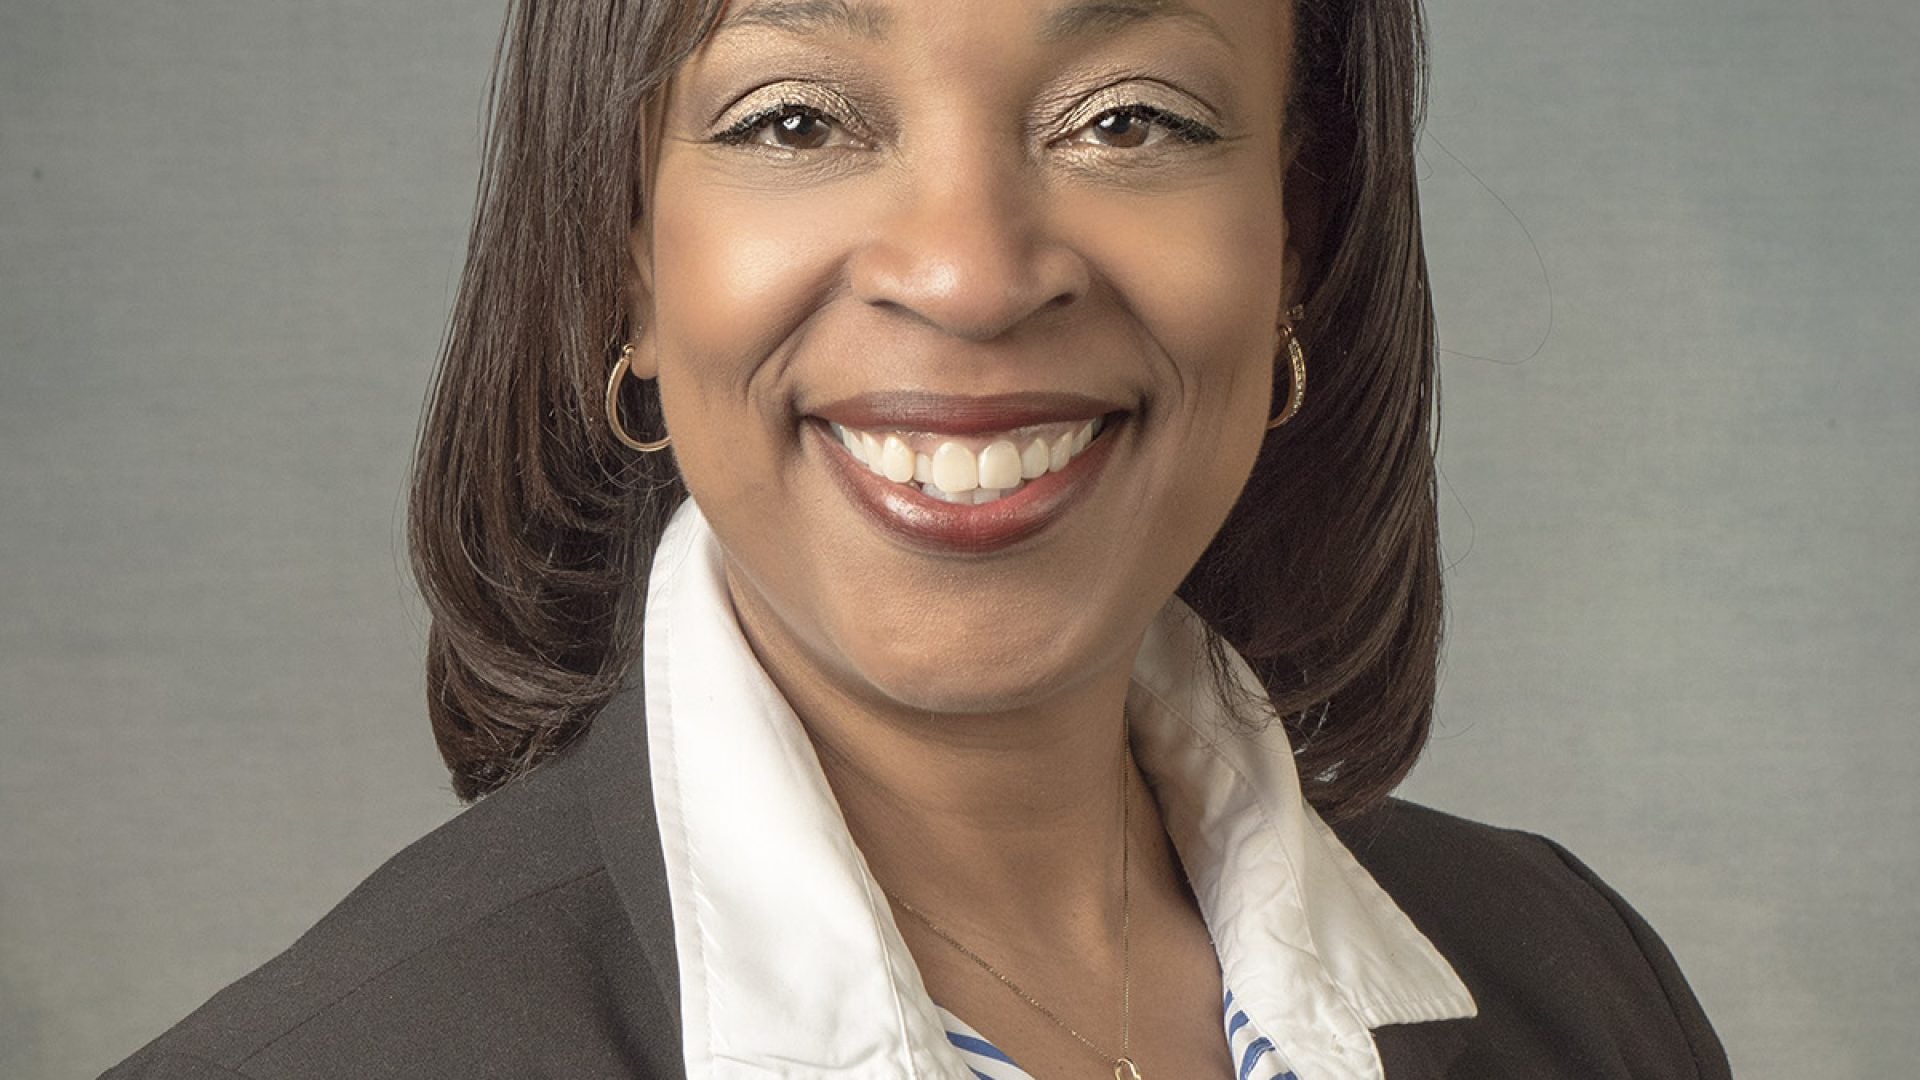 City Councilwoman Sharon Tucker Set To Become The First Black Mayor Of Fort Wayne, Indiana